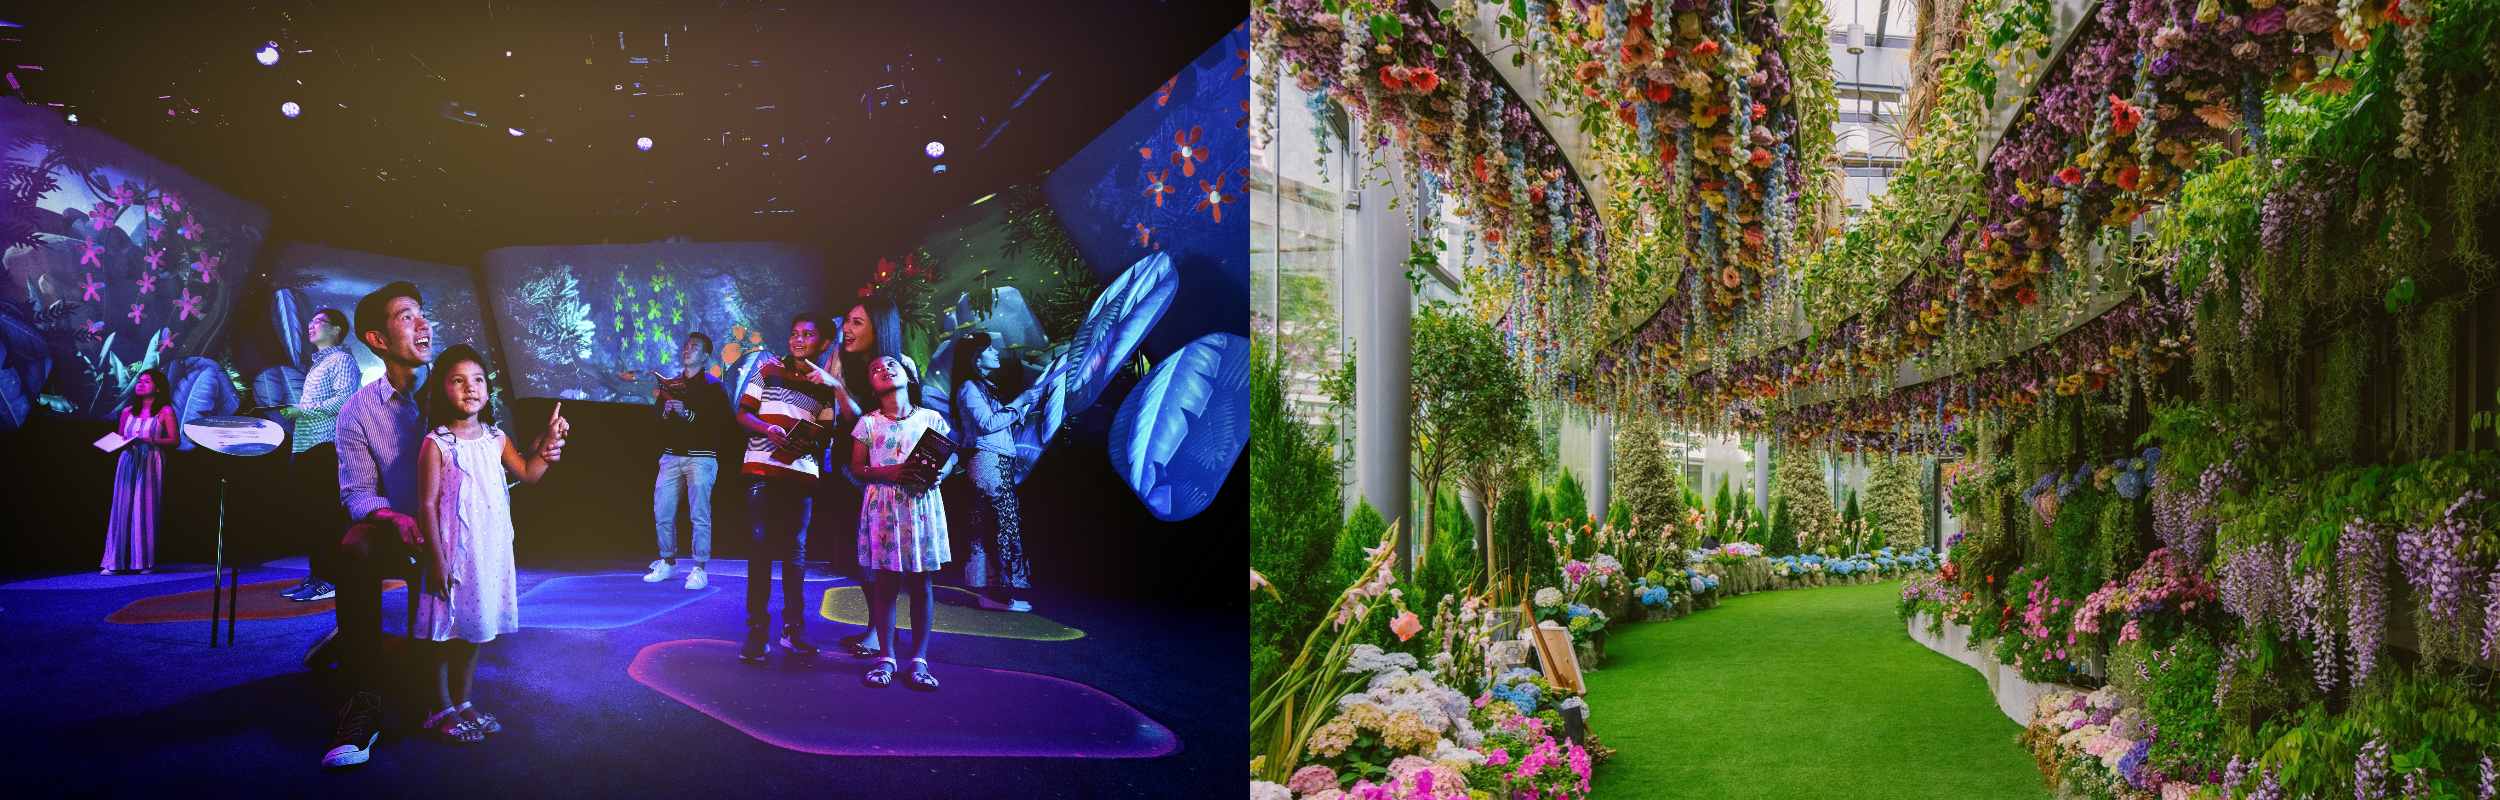 Jewel Changi Airport’s Experience Studio and Gardens by the Bay’s Floral Fantasy 4D tour